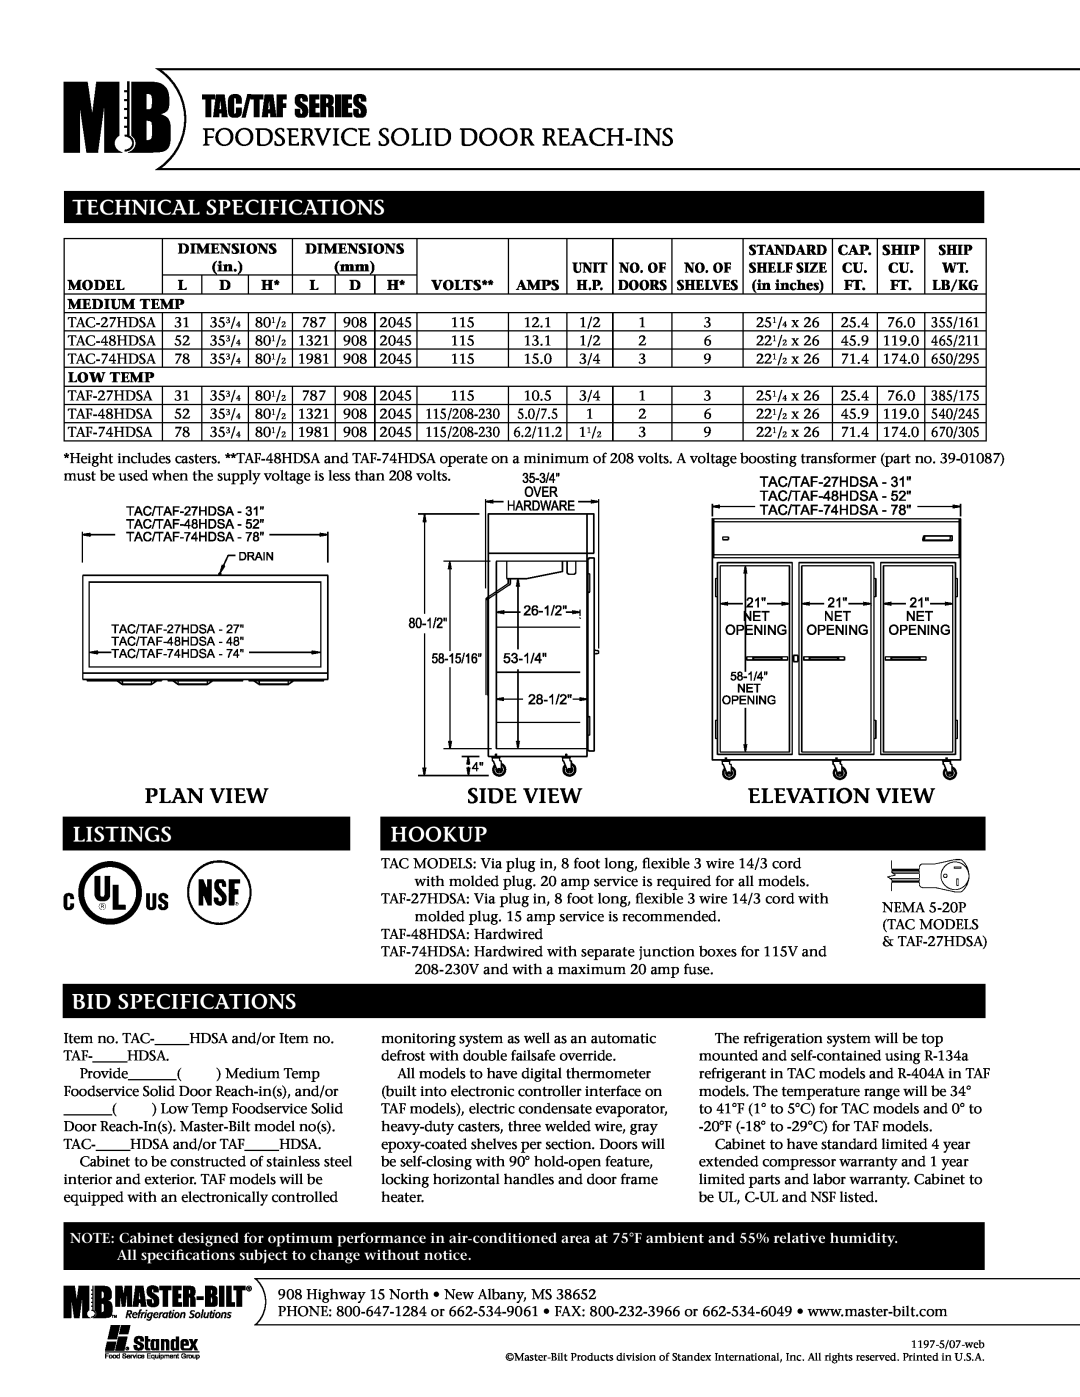 Master Bilt TAF-27HDSA Technical Specifications, Plan View, Listings, Side Viewelevation View, Hookup, Bid Specifications 